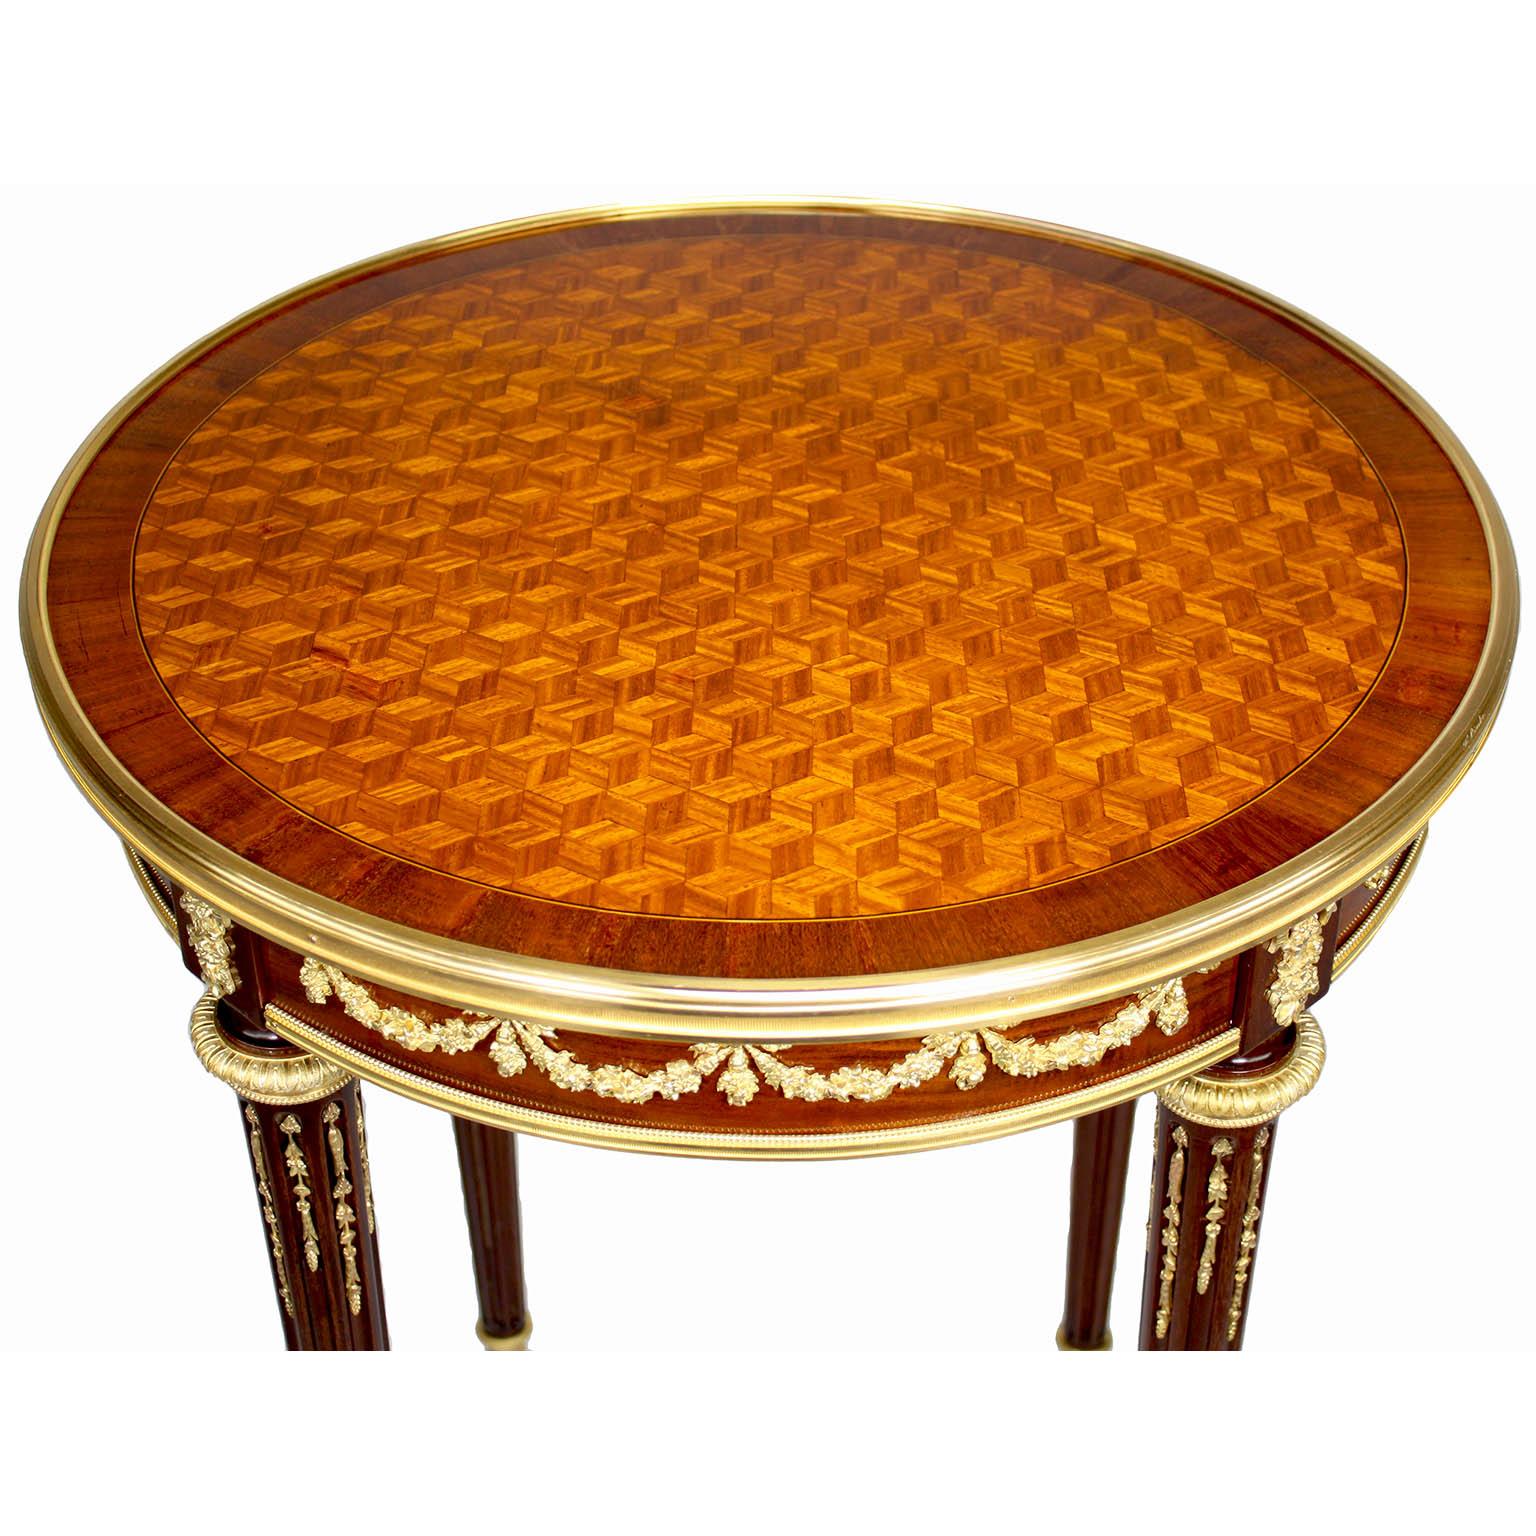 A Fine French 19th-20th Century Louis XVI Style Mahogany, Tulipwood and Gilt-Bronze (Ormolu) Mounted Belle Époque Guéridon Circular Side-Table with a Parquetry Top, by François Linke (1855-1946). The single-drawer end table inset with a symmetrical